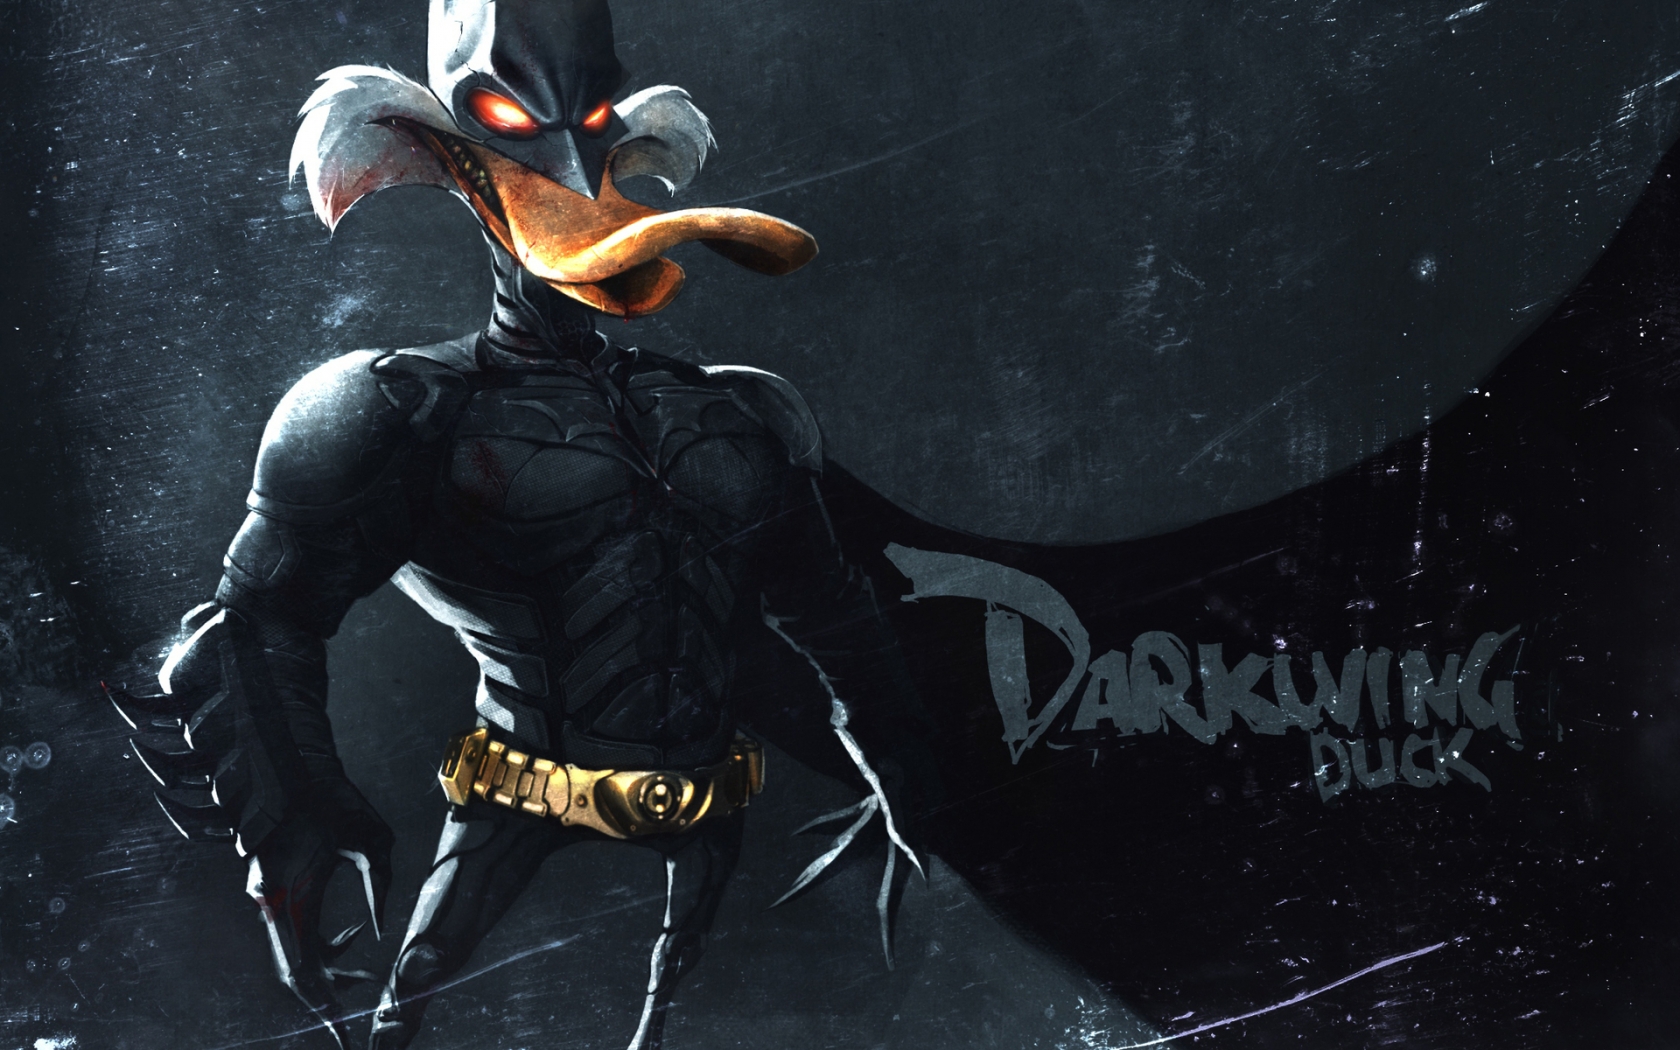 Darkwing Duck Mask for 1680 x 1050 widescreen resolution